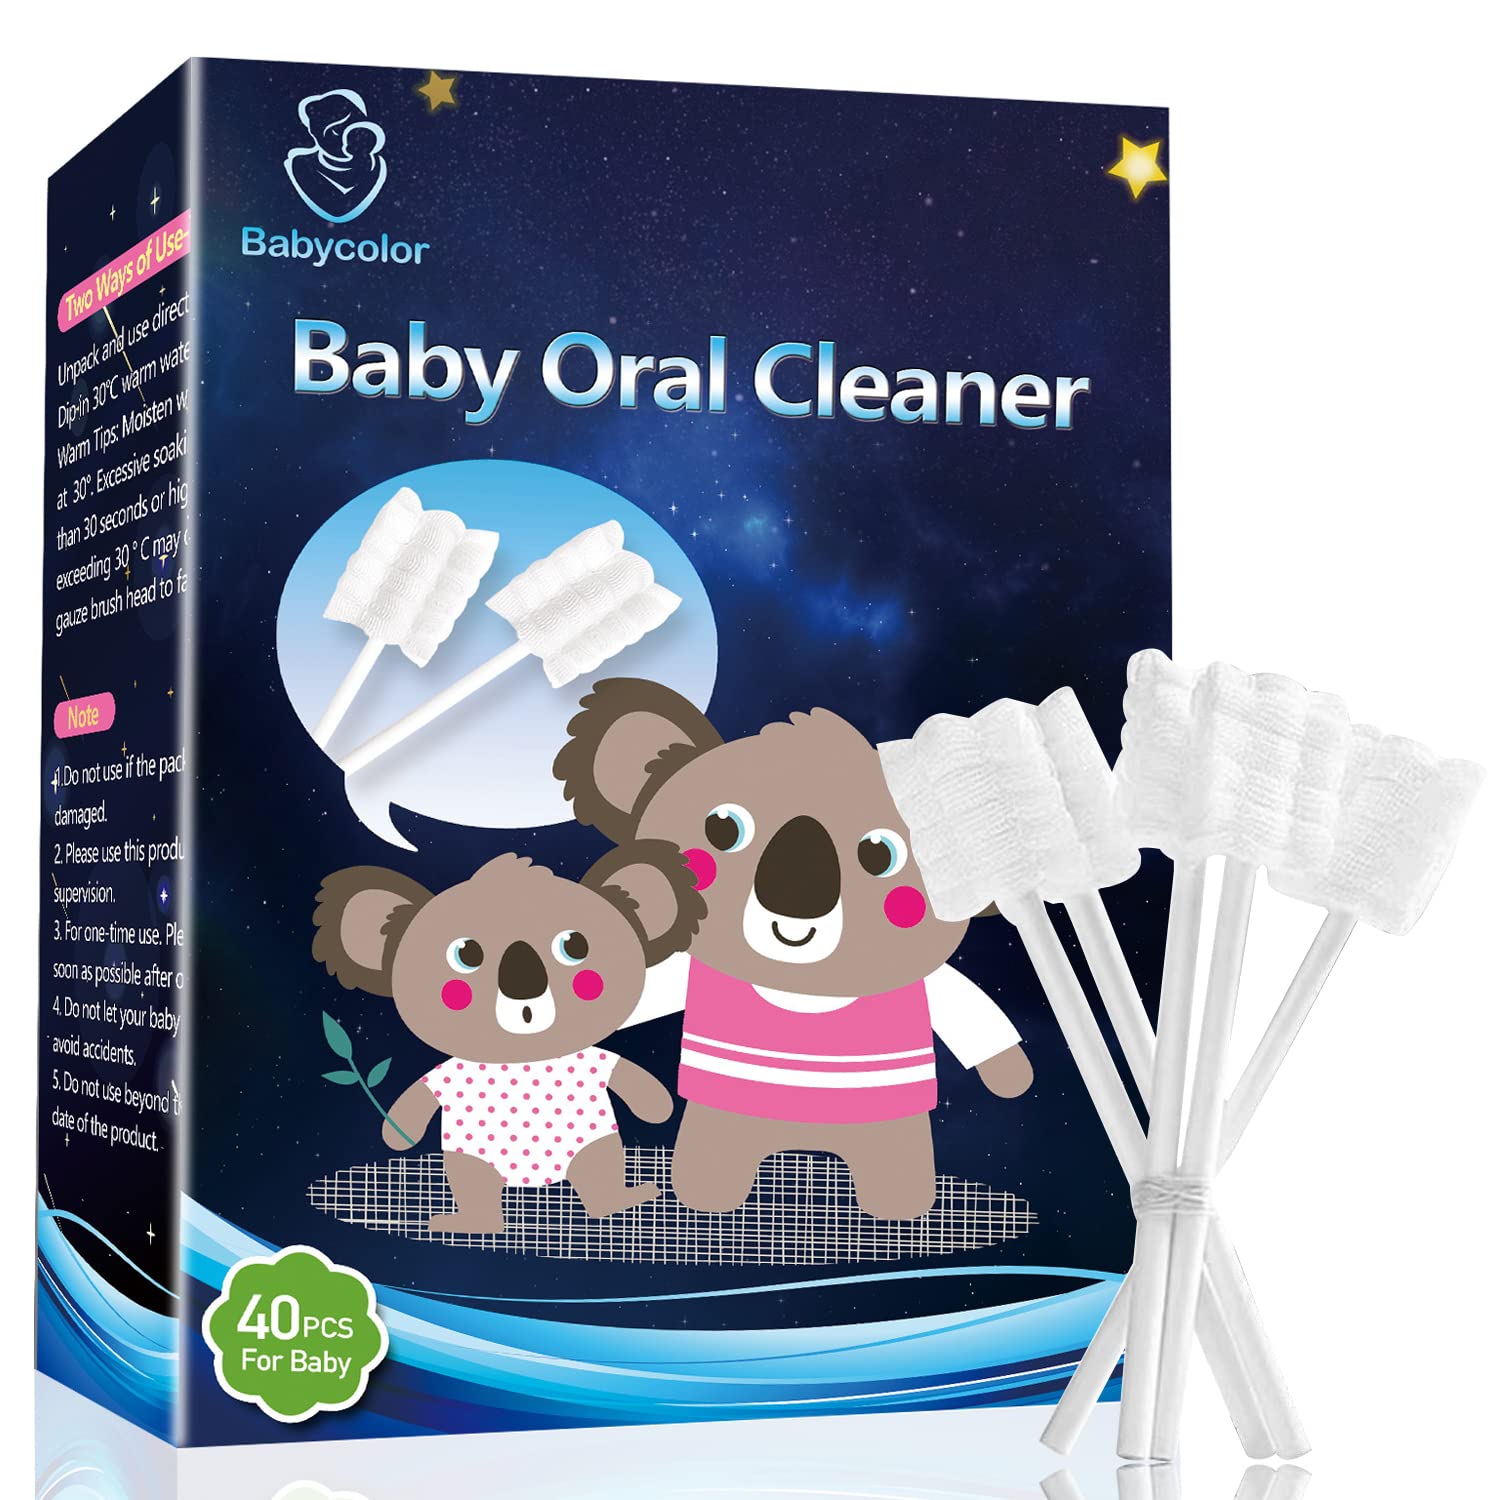 Baby Toothbrush, Baby Tongue Cleaner, 40Pcs Disposable Infant